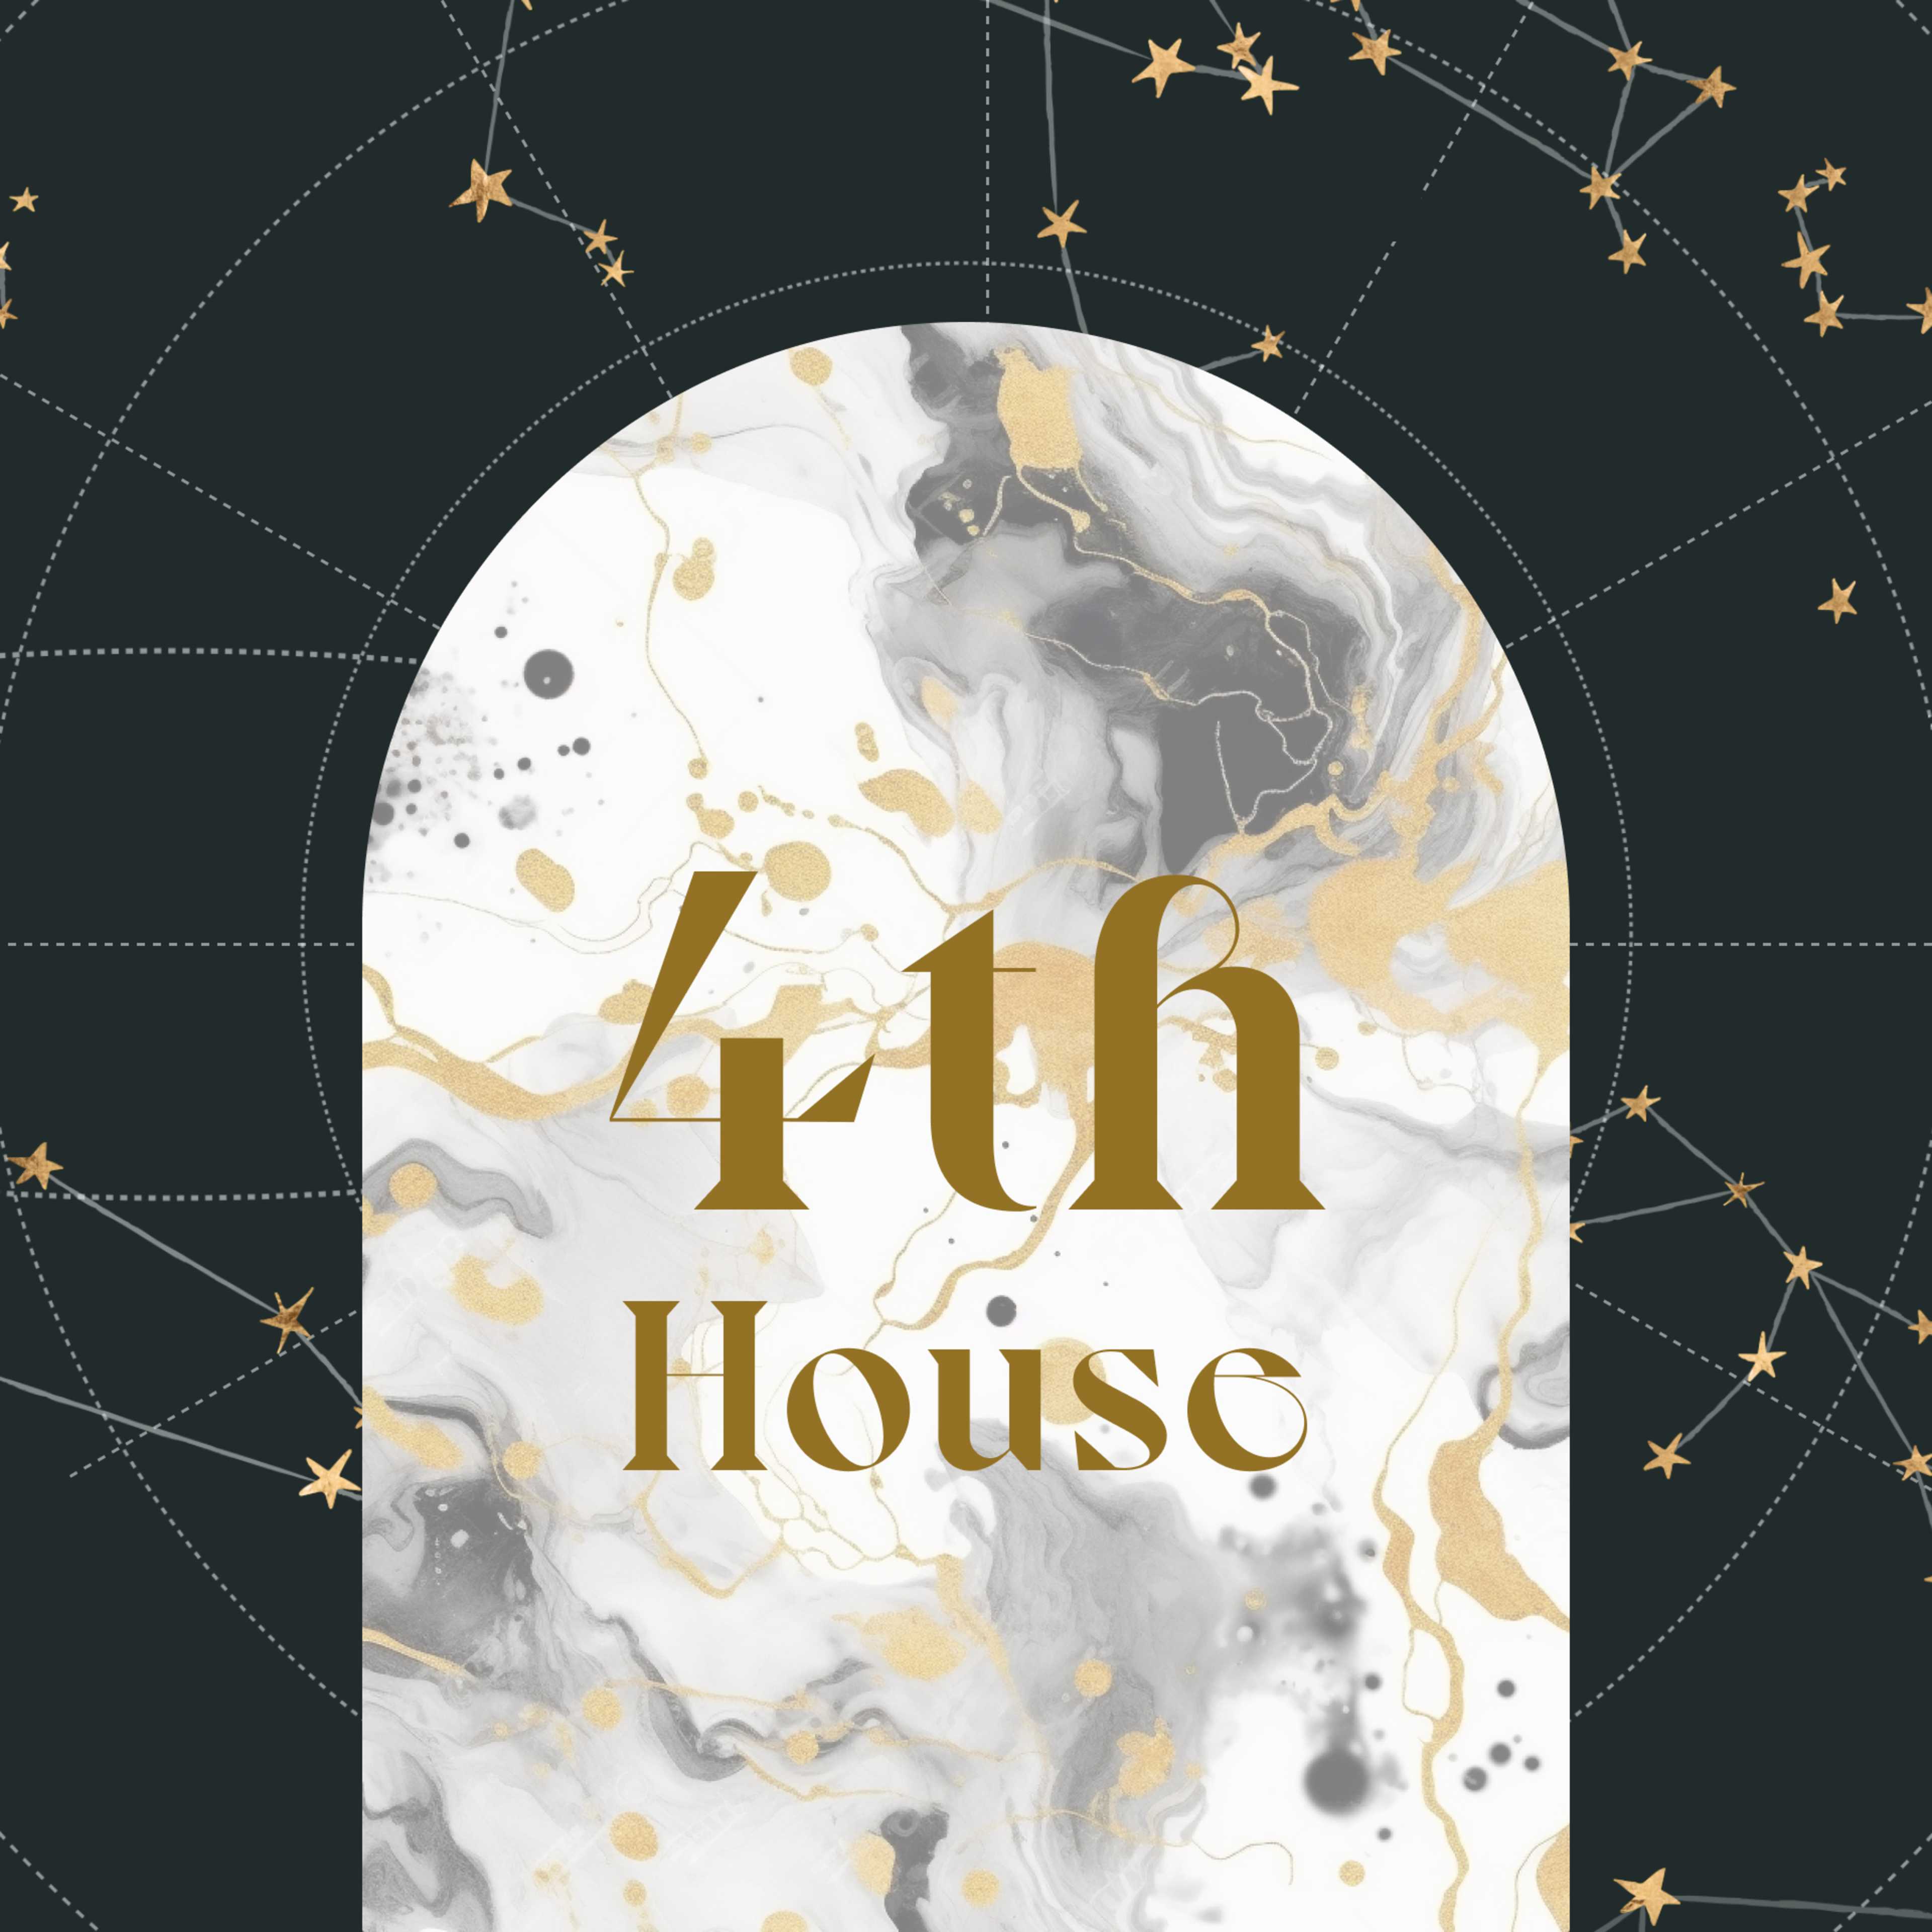 Fourth House in Astrology